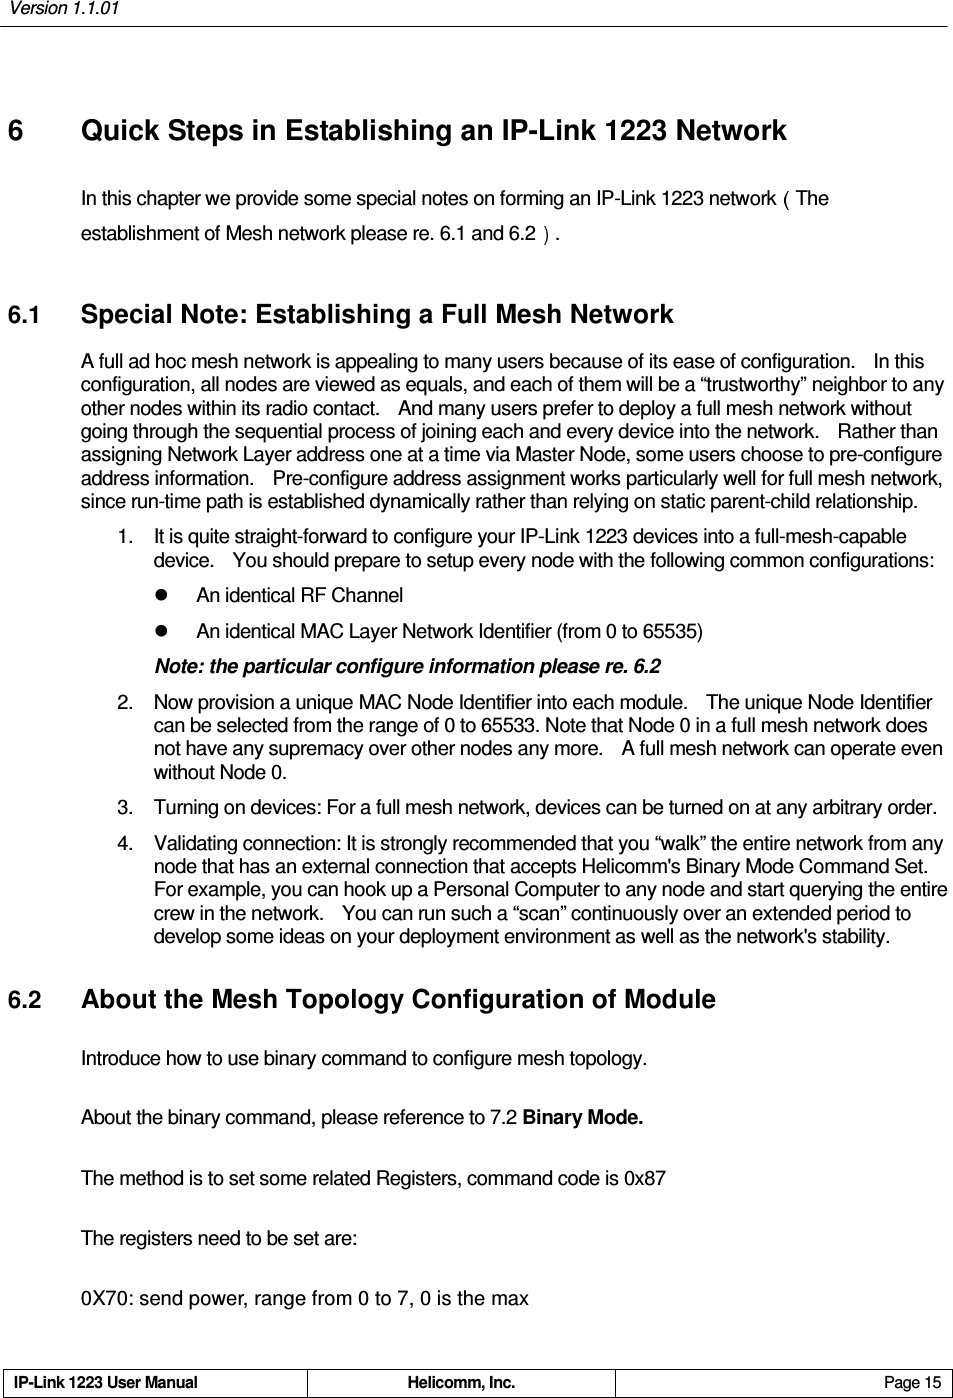 Version 1.1.01     IP-Link 1223 User Manual  Helicomm, Inc.  Page 15   6  Quick Steps in Establishing an IP-Link 1223 Network In this chapter we provide some special notes on forming an IP-Link 1223 network The establishment of Mesh network please re. 6.1 and 6.2 .   6.1 Special Note: Establishing a Full Mesh Network A full ad hoc mesh network is appealing to many users because of its ease of configuration.    In this configuration, all nodes are viewed as equals, and each of them will be a “trustworthy” neighbor to any other nodes within its radio contact.    And many users prefer to deploy a full mesh network without going through the sequential process of joining each and every device into the network.    Rather than assigning Network Layer address one at a time via Master Node, some users choose to pre-configure address information.    Pre-configure address assignment works particularly well for full mesh network, since run-time path is established dynamically rather than relying on static parent-child relationship. 1.  It is quite straight-forward to configure your IP-Link 1223 devices into a full-mesh-capable device.    You should prepare to setup every node with the following common configurations:   An identical RF Channel   An identical MAC Layer Network Identifier (from 0 to 65535) Note: the particular configure information please re. 6.2 2.  Now provision a unique MAC Node Identifier into each module.    The unique Node Identifier can be selected from the range of 0 to 65533. Note that Node 0 in a full mesh network does not have any supremacy over other nodes any more.    A full mesh network can operate even without Node 0.   3.  Turning on devices: For a full mesh network, devices can be turned on at any arbitrary order. 4.  Validating connection: It is strongly recommended that you “walk” the entire network from any node that has an external connection that accepts Helicomm&apos;s Binary Mode Command Set.   For example, you can hook up a Personal Computer to any node and start querying the entire crew in the network.    You can run such a “scan” continuously over an extended period to develop some ideas on your deployment environment as well as the network&apos;s stability. 6.2 About the Mesh Topology Configuration of Module Introduce how to use binary command to configure mesh topology. About the binary command, please reference to 7.2 Binary Mode. The method is to set some related Registers, command code is 0x87 The registers need to be set are: 0X70: send power, range from 0 to 7, 0 is the max 